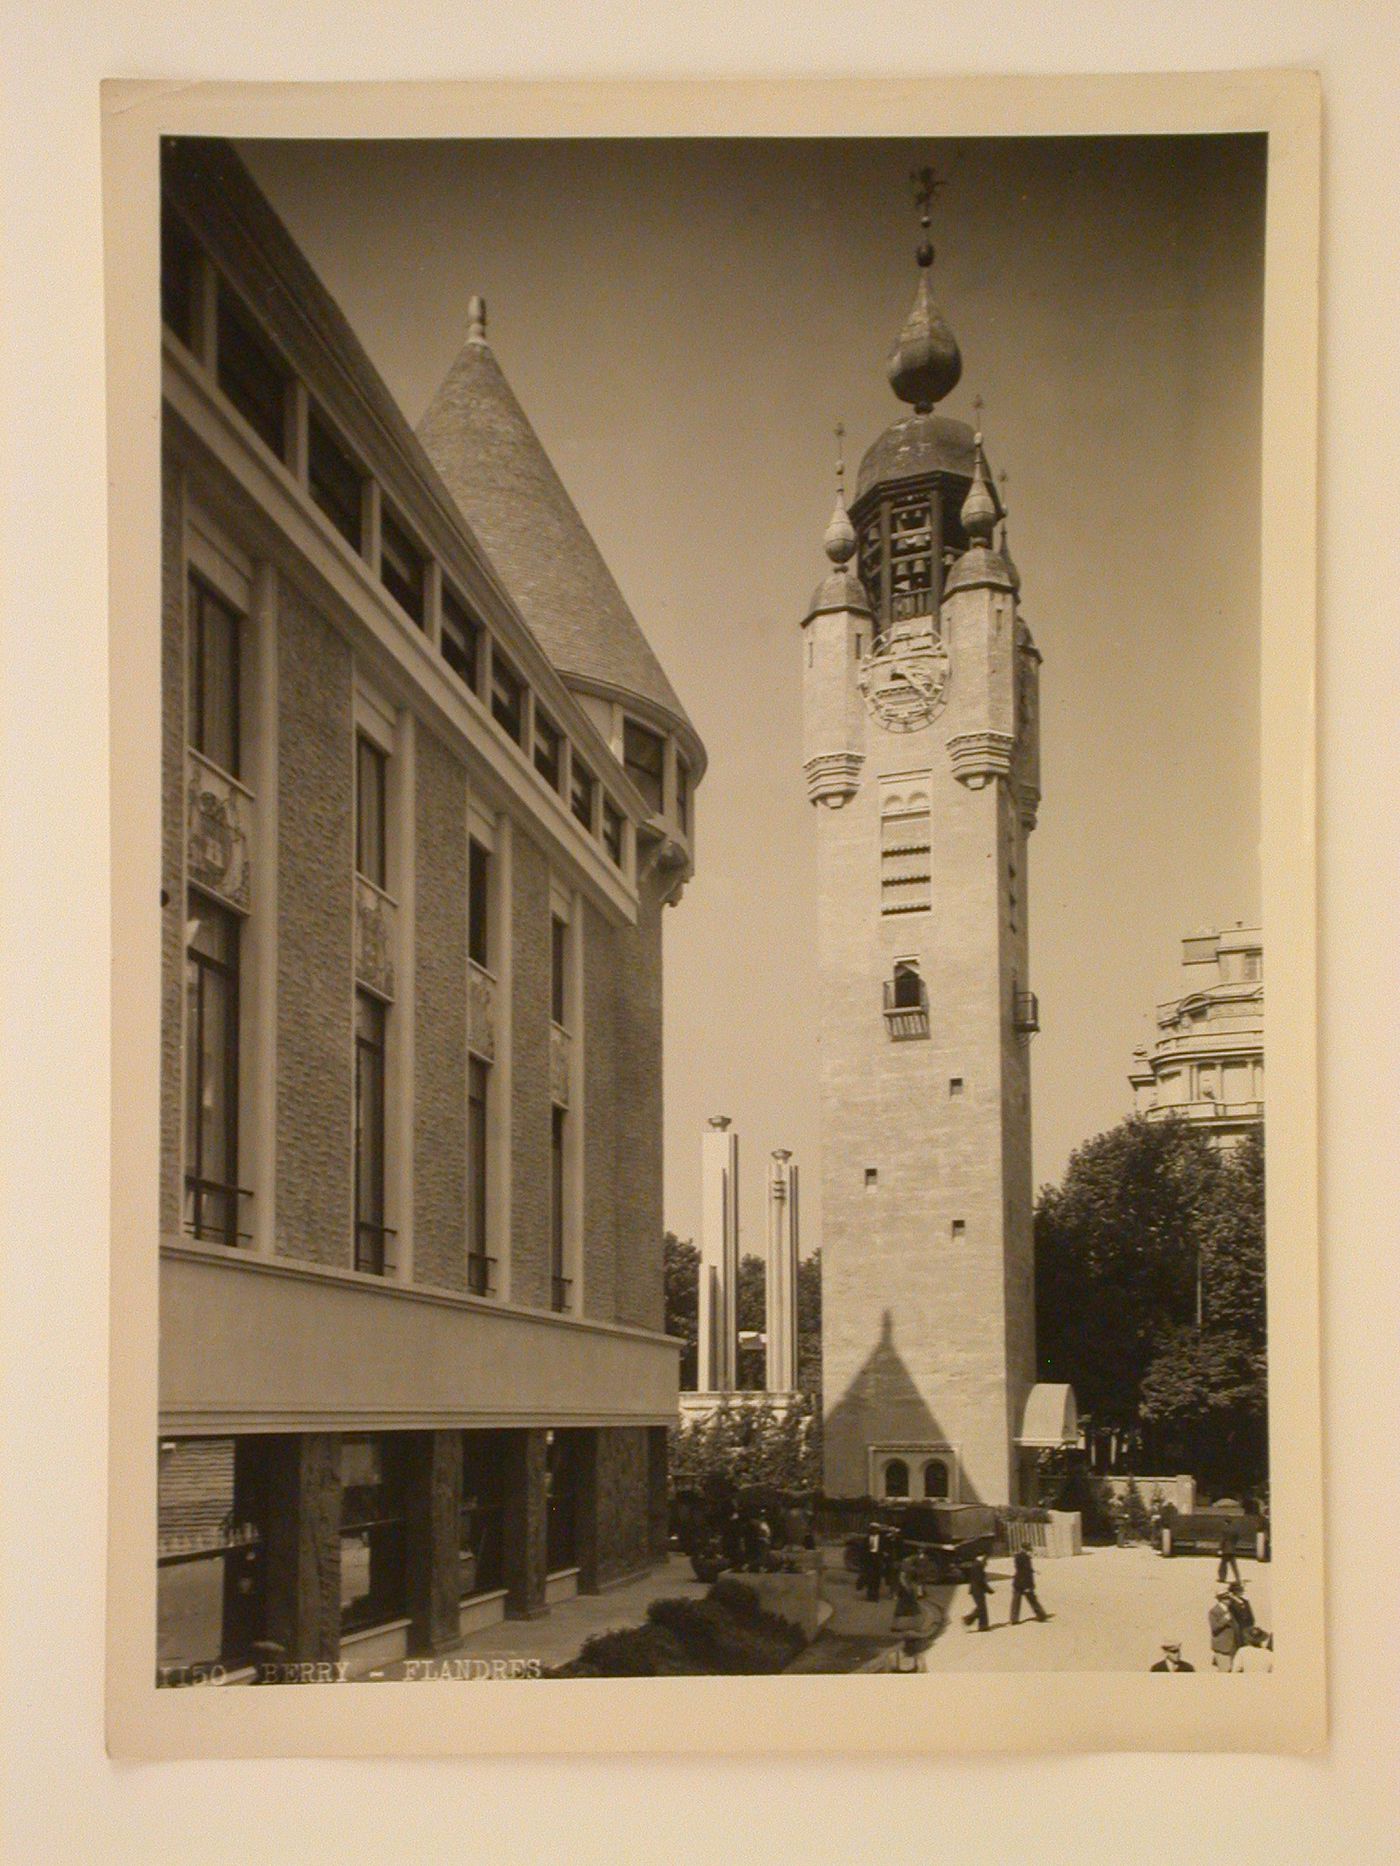 Partial view of Nivernais' and Berry's pavilion with the L'Artois' and Flanders' pavilion on the right, 1937 Exposition internationale, Paris, France